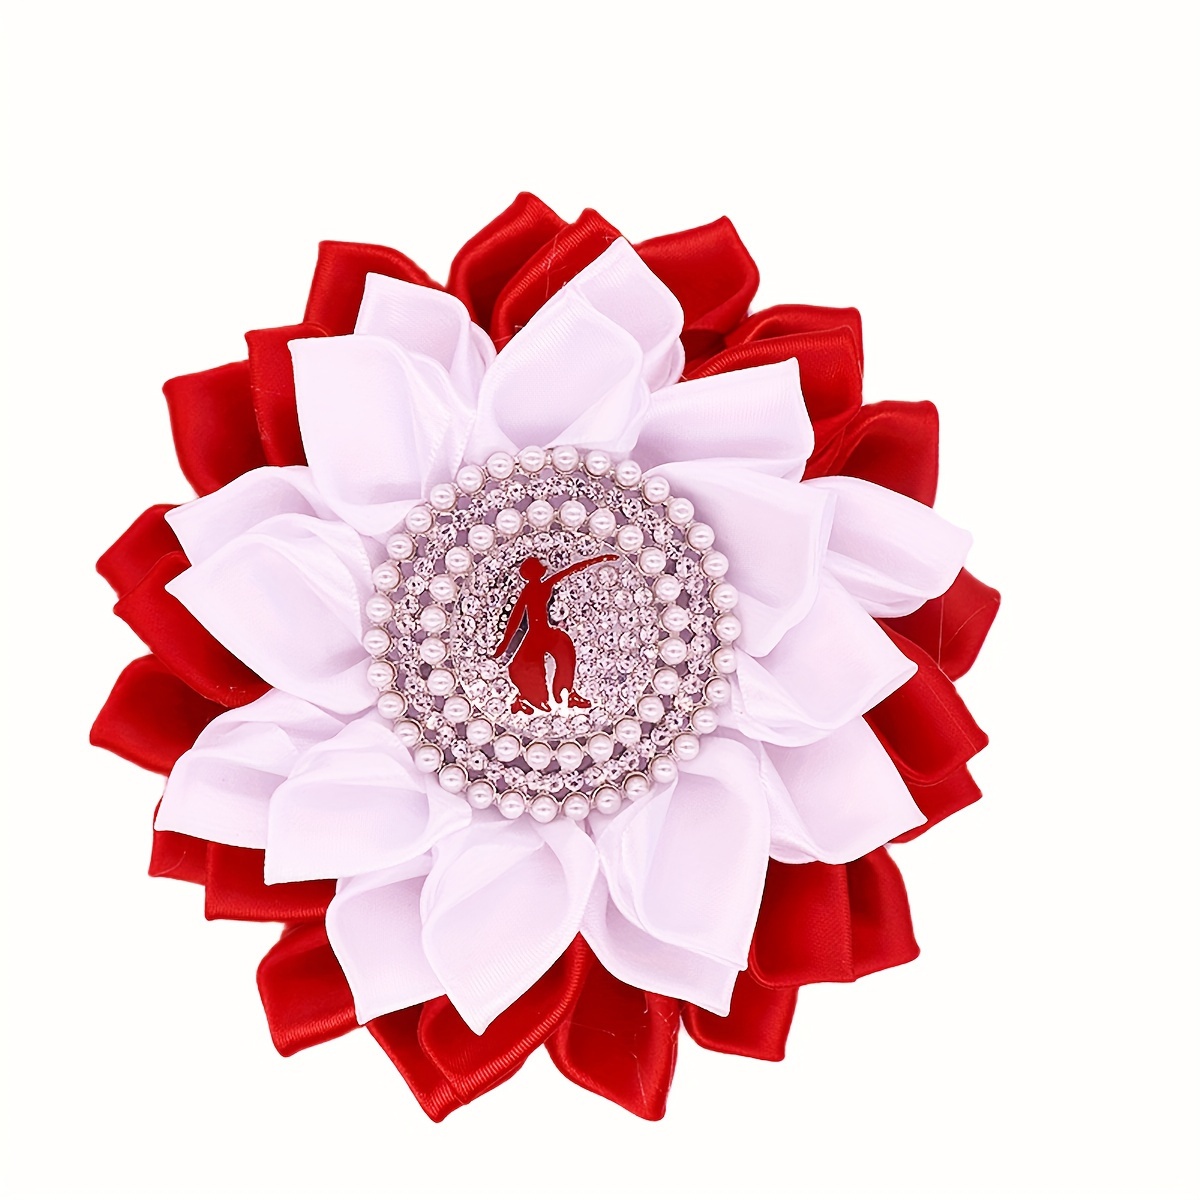 

Delta Lady Society Rhodium-plated Alloy Brooch With Synthetic Crystals, Sporty Campus Theme Fabric Ribbon Corsage, Party Gift Brooch Pin For All Seasons